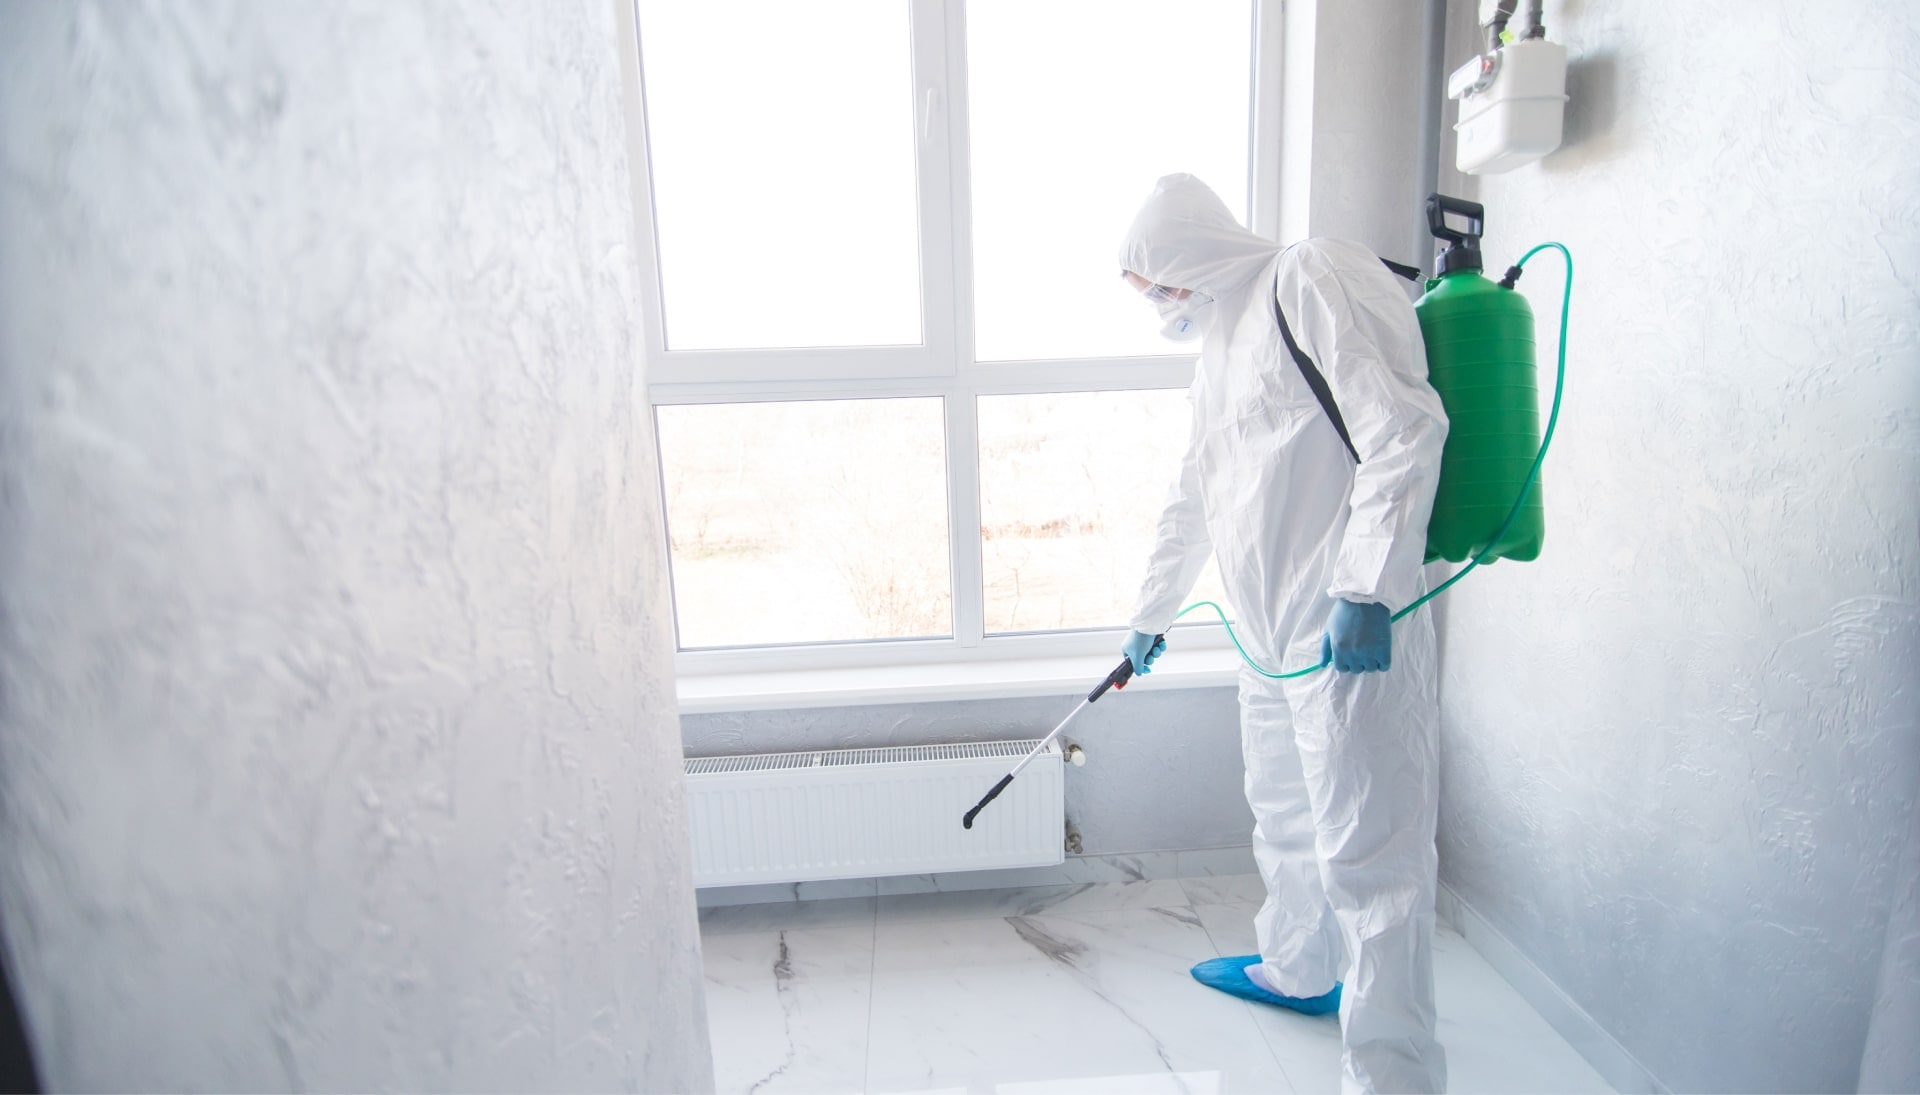 We provide the highest-quality mold inspection, testing, and removal services in the Chesterfield, Virginia area.